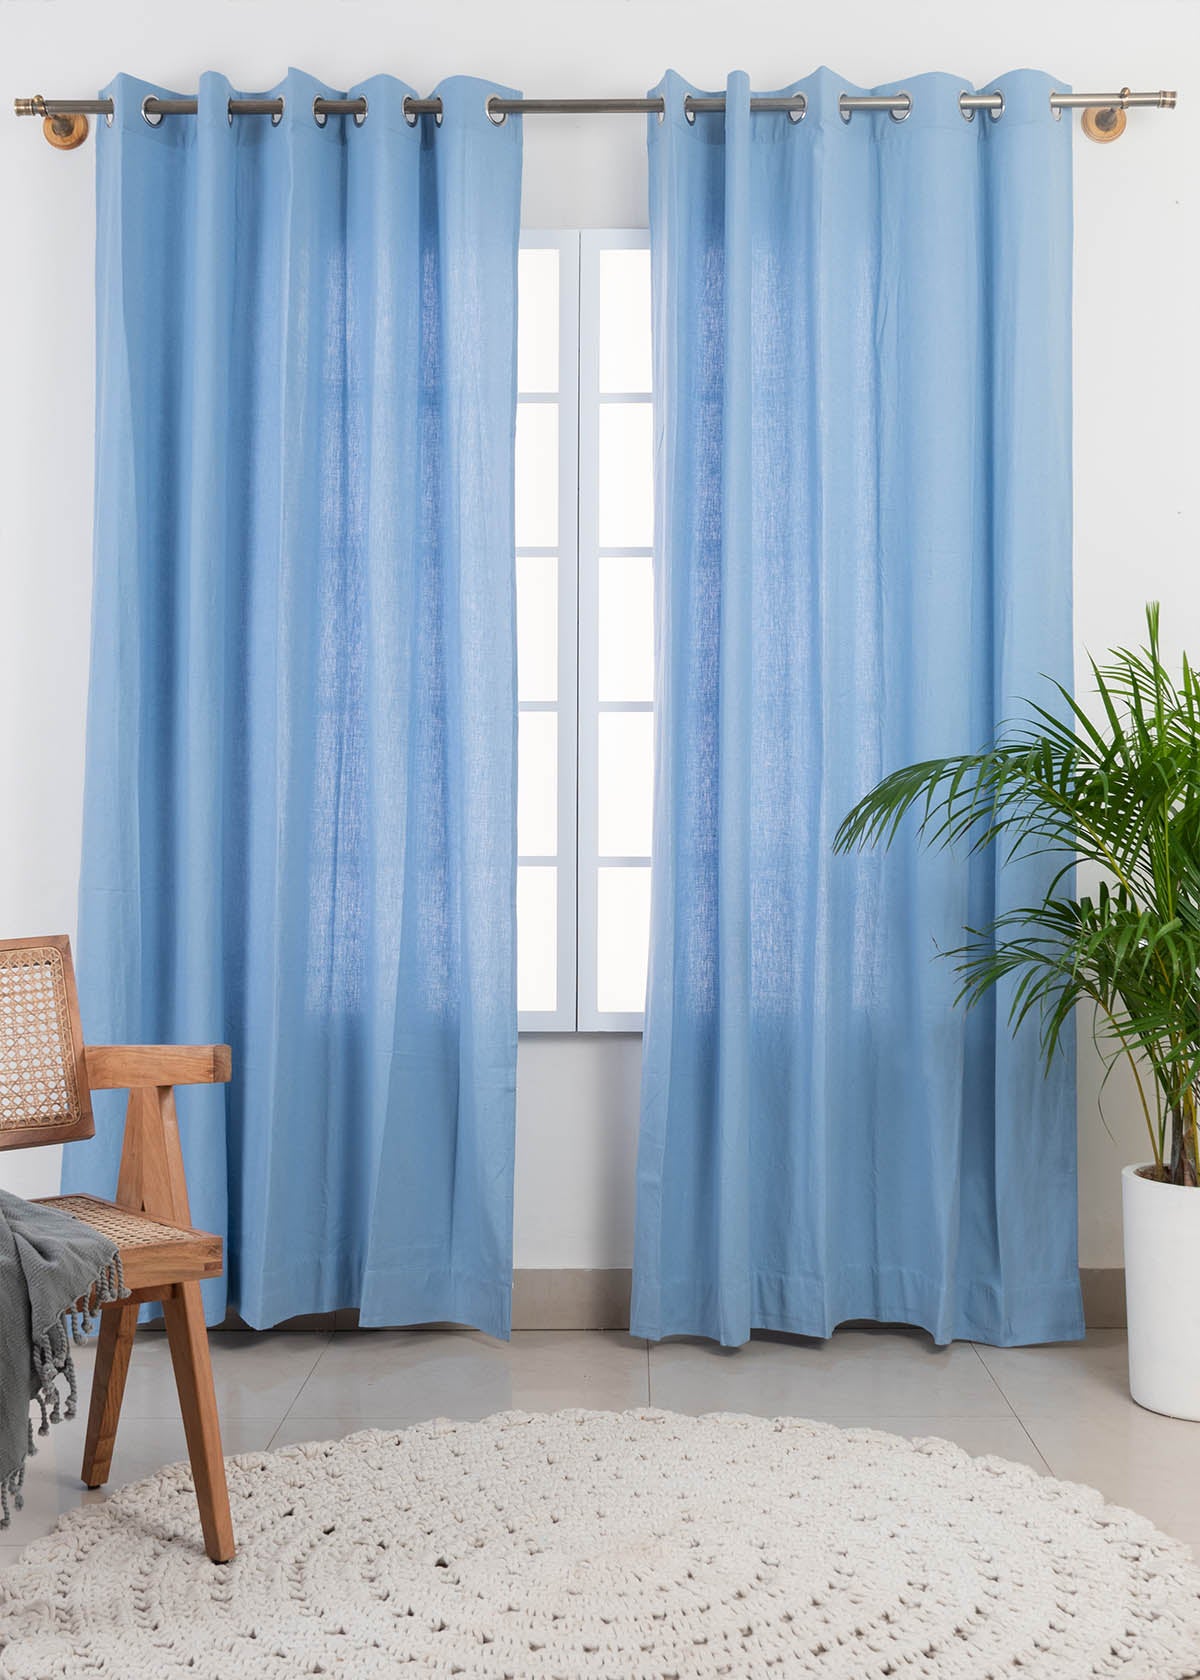 Solid Powder blue 100% customizable cotton plain curtain for bedroom - Room darkening - Pack of 1